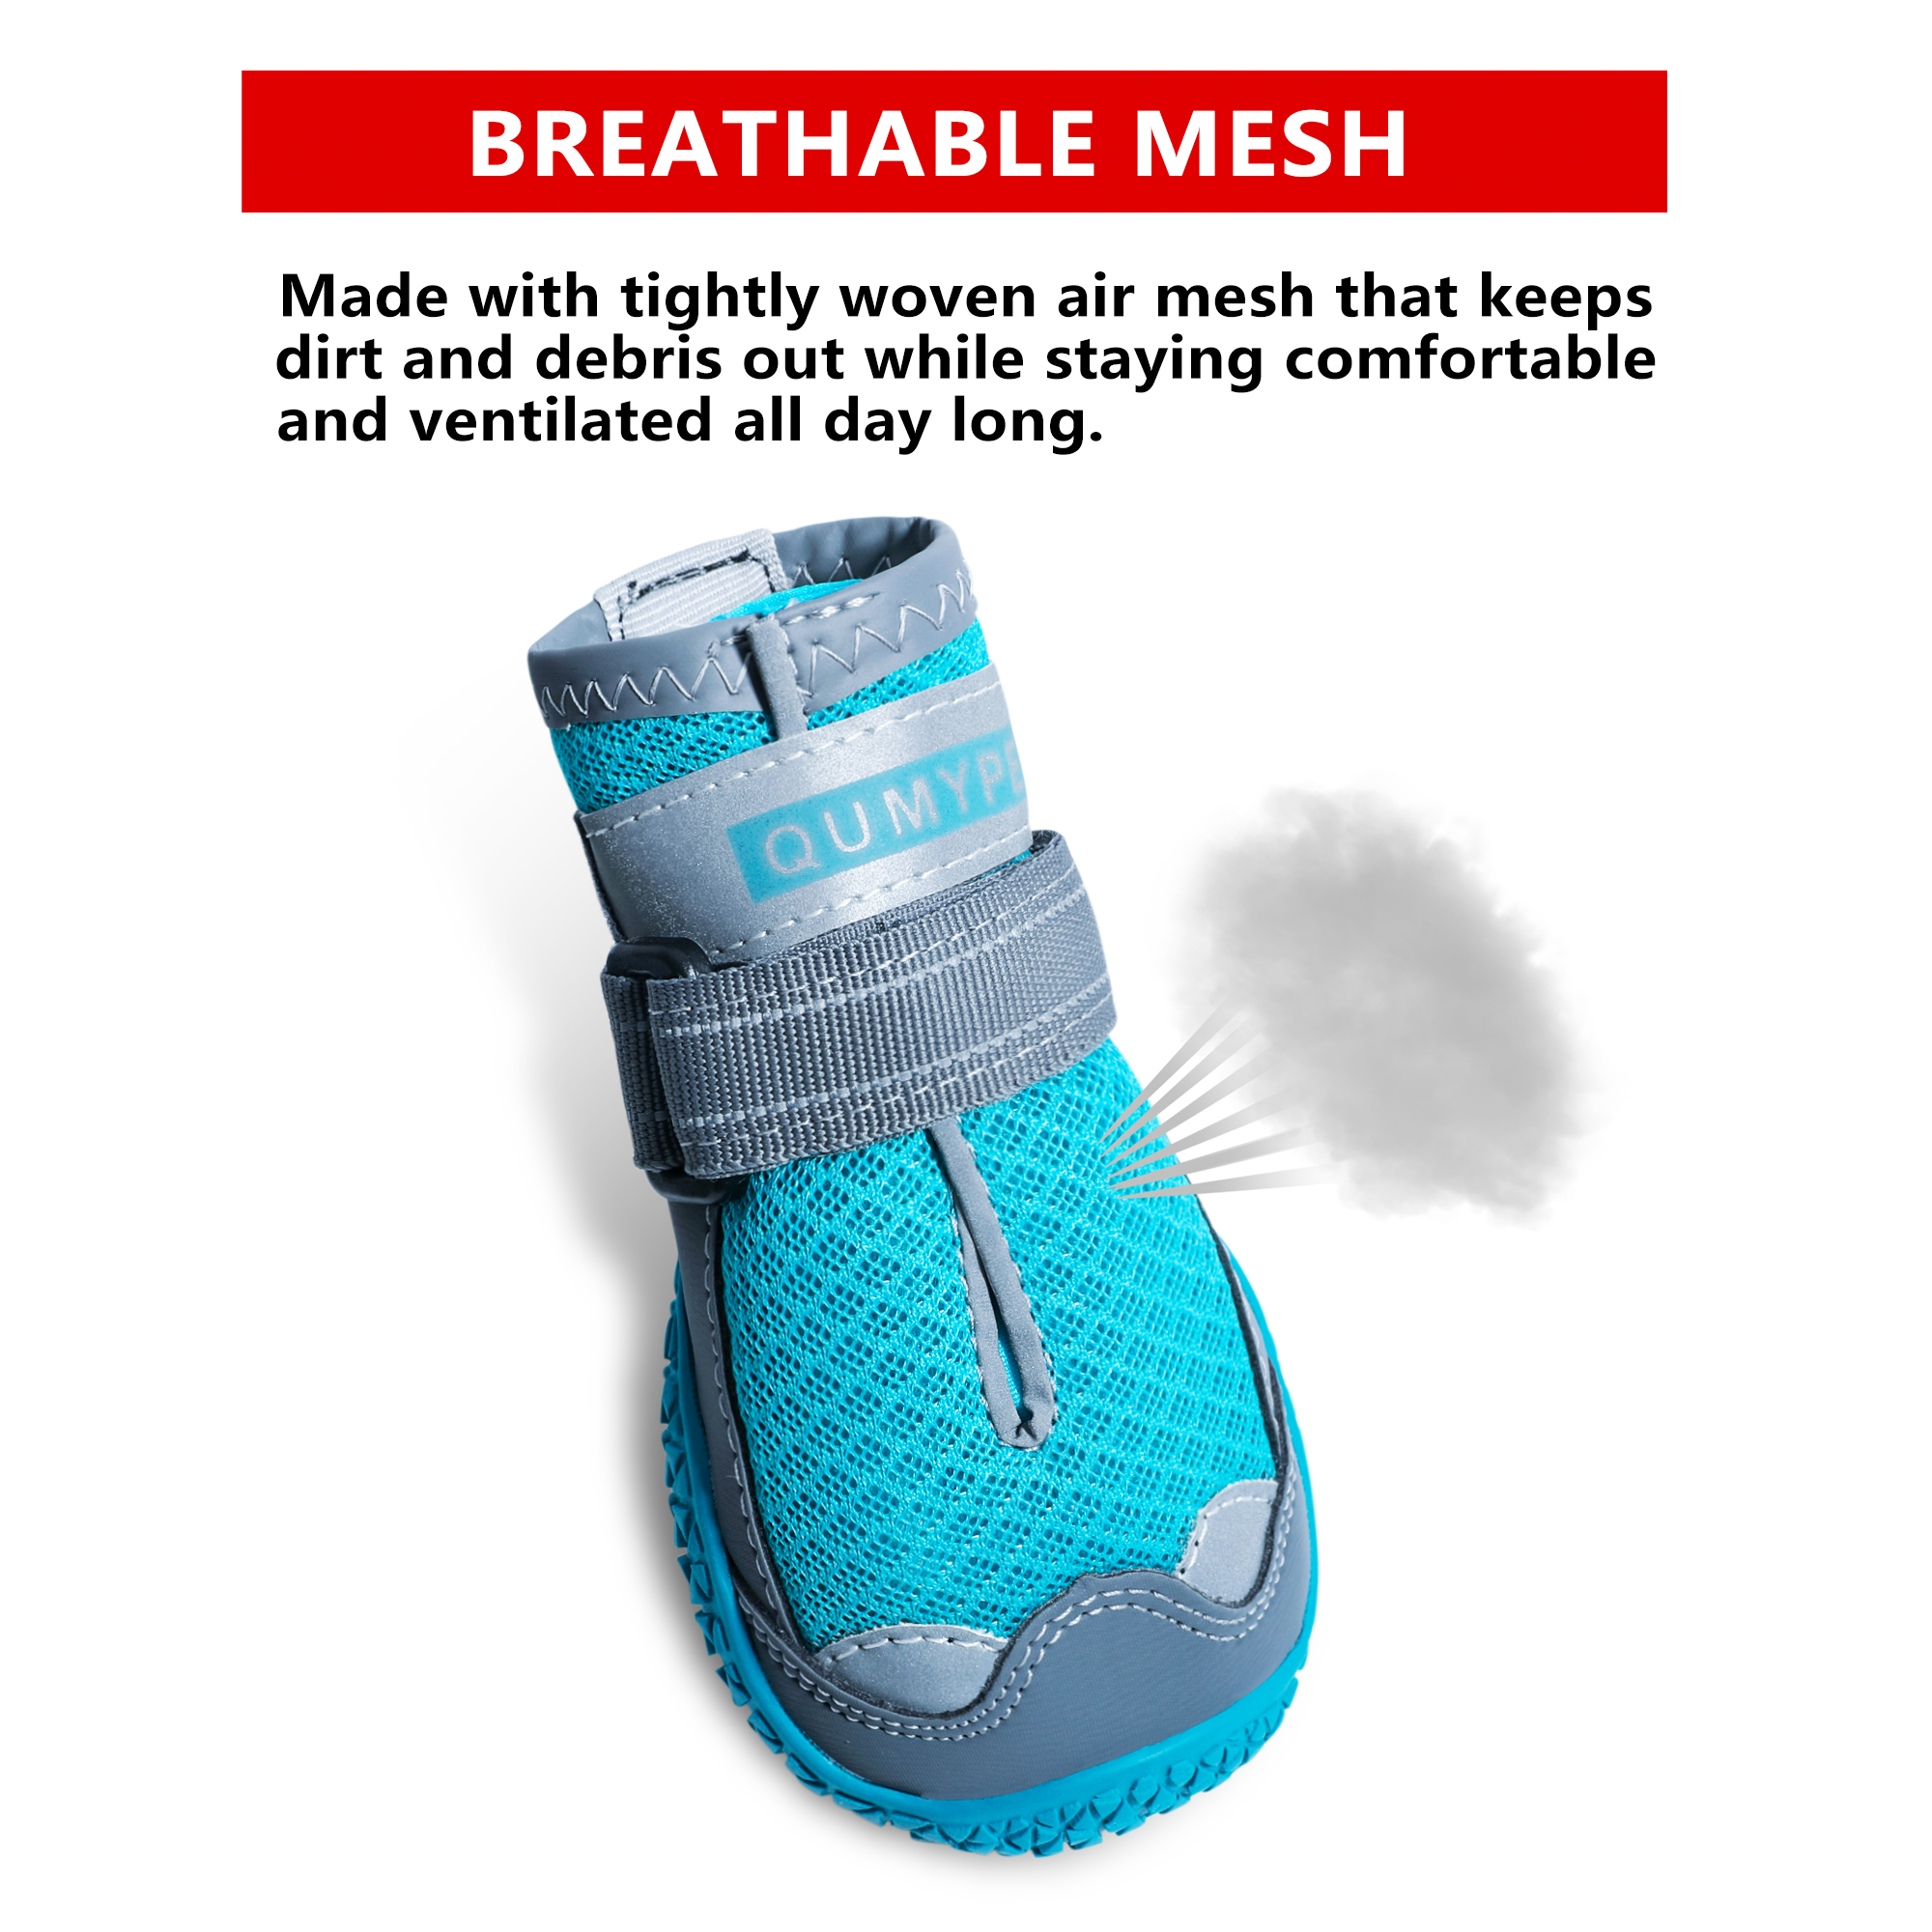 vecomfy Breathable Mesh Dog Shoes for Small Dogs,Summer Hot Pavement Protect Paws Dog Boots,Waterproof Non-Slip 